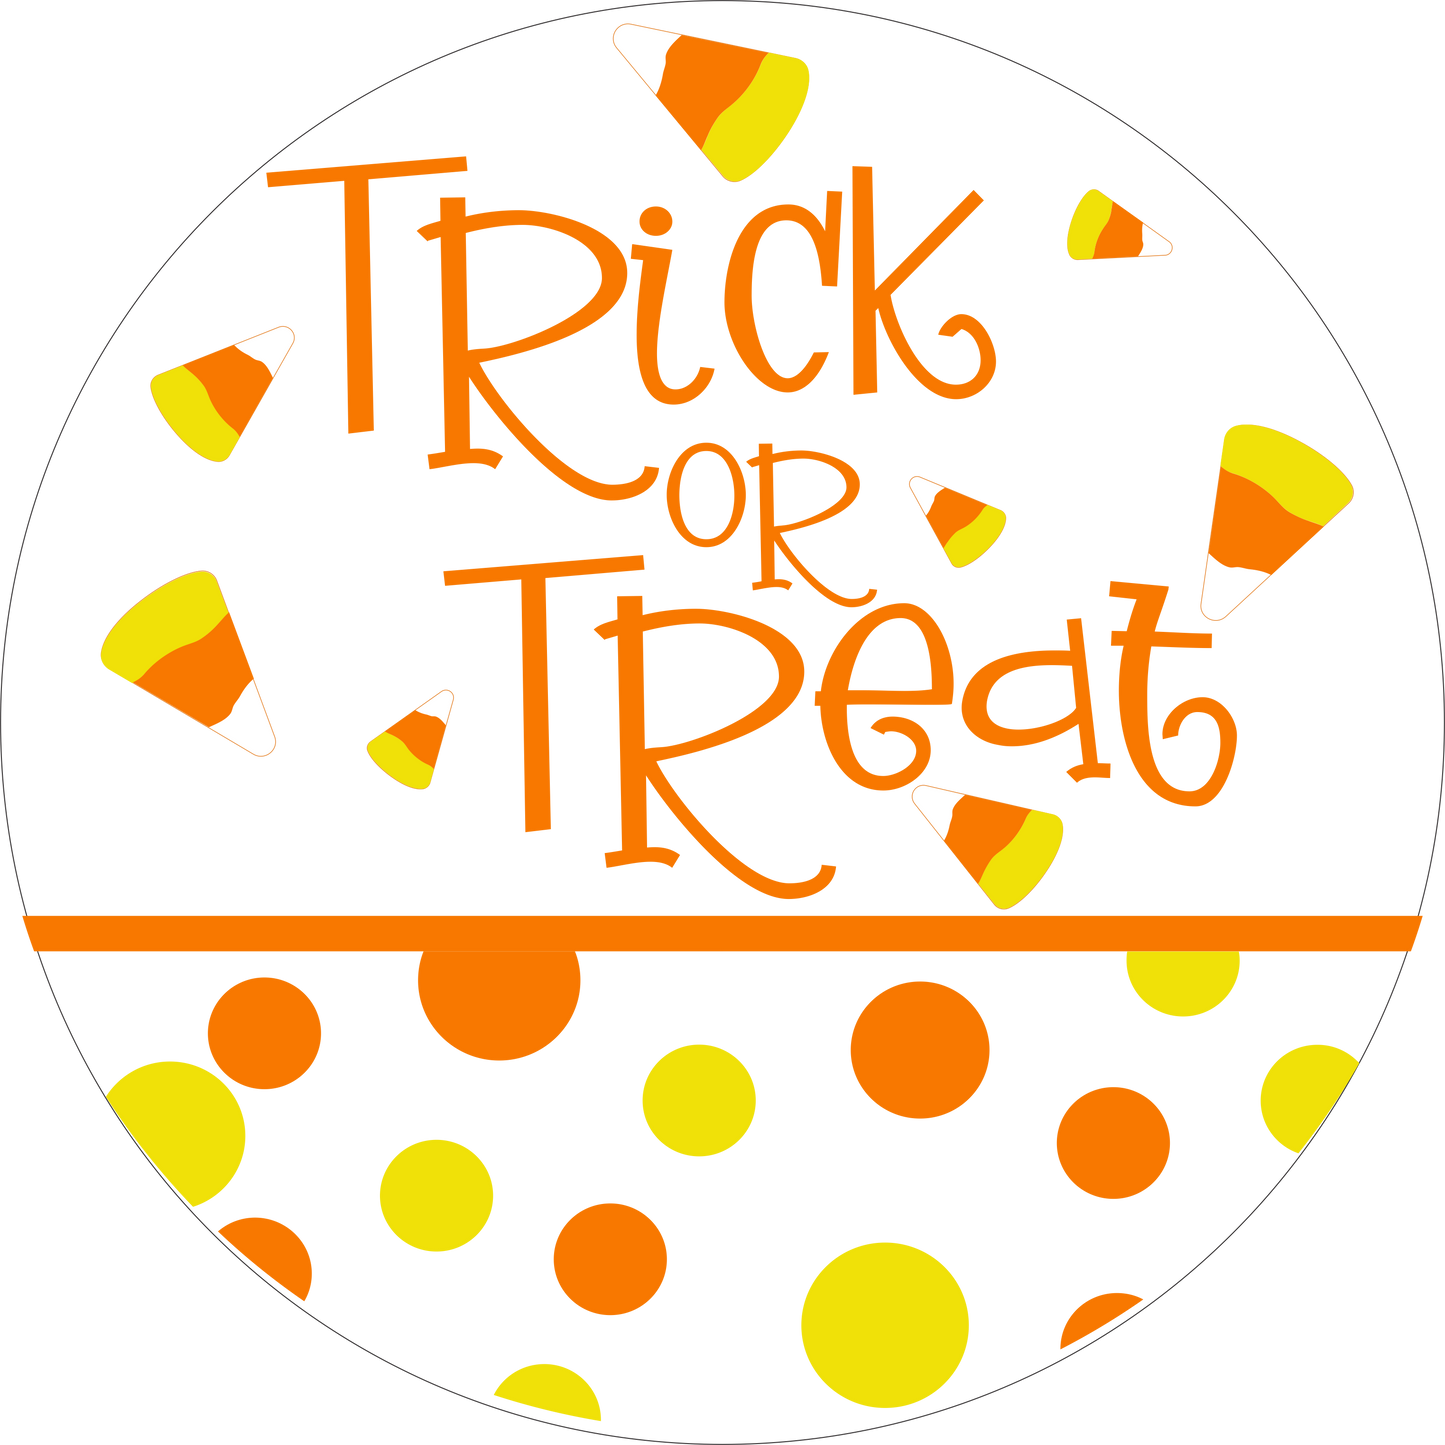 Trick or Treat candy corn sign